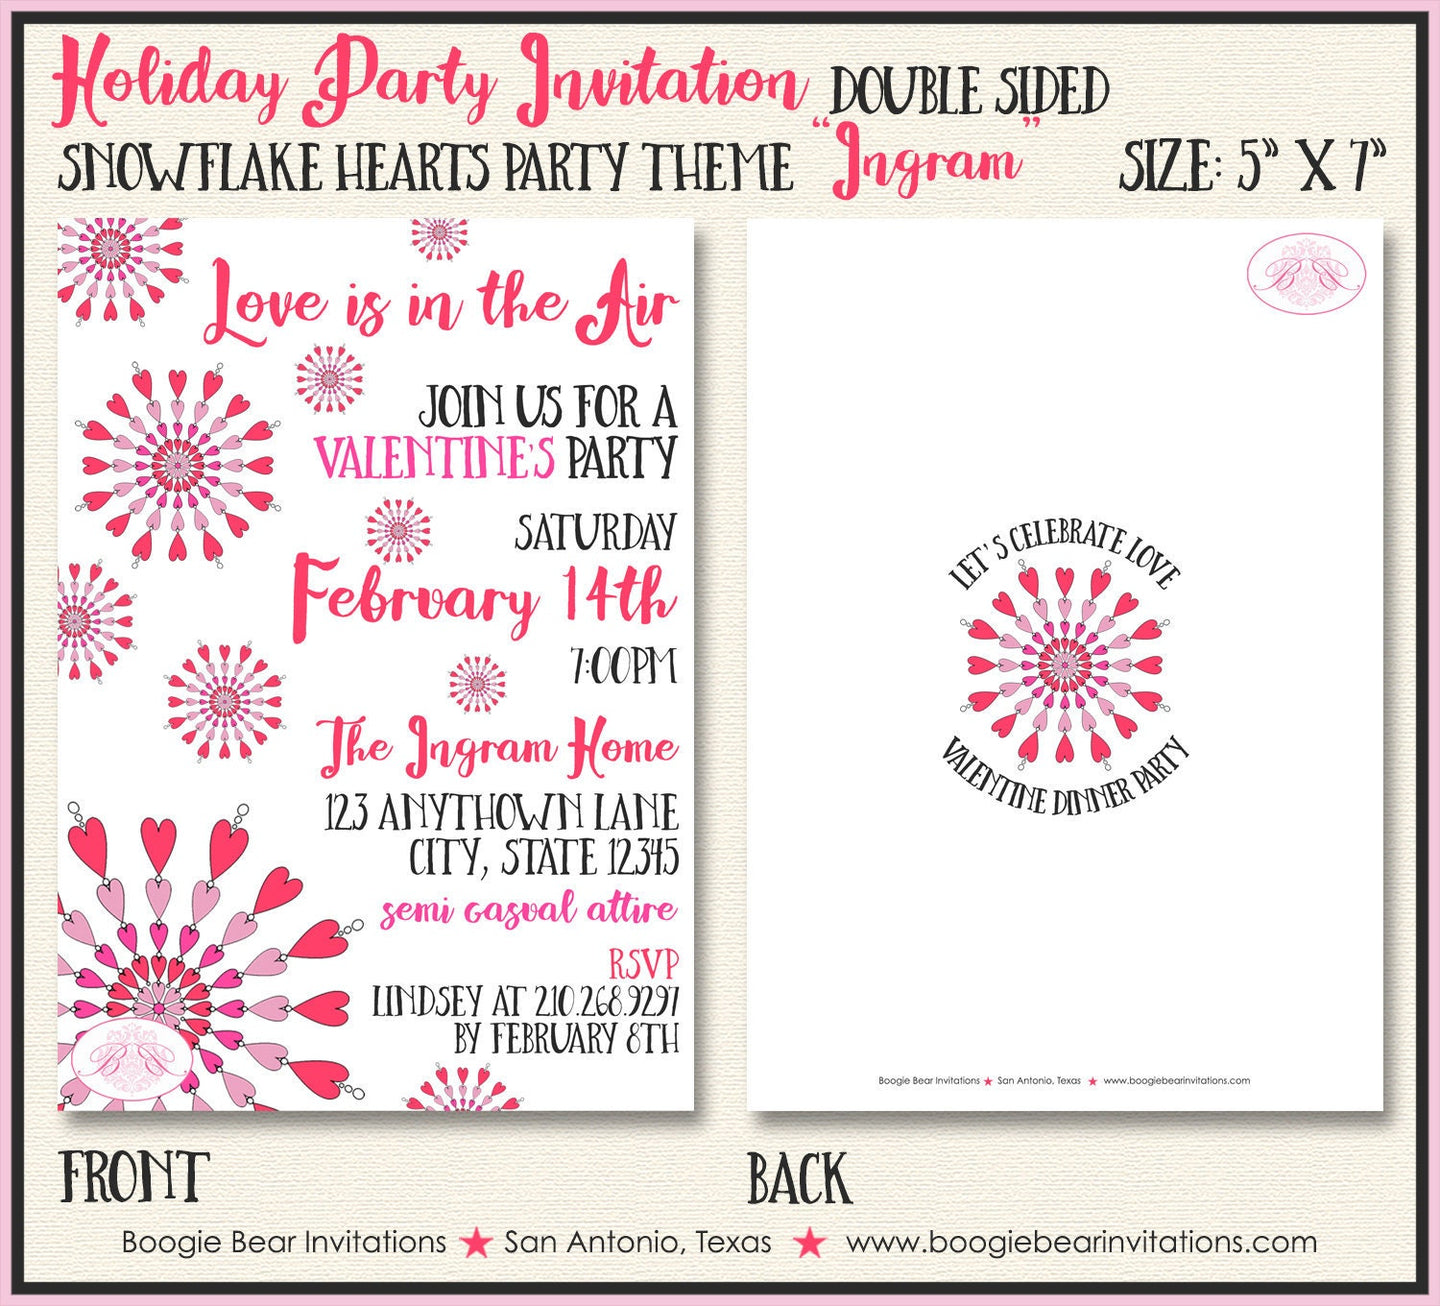 Snowflake Hearts Valentine's Party Invitation Red Pink Day Love Radial Snow Boogie Bear Invitations Ingram Theme Paperless Printable Printed